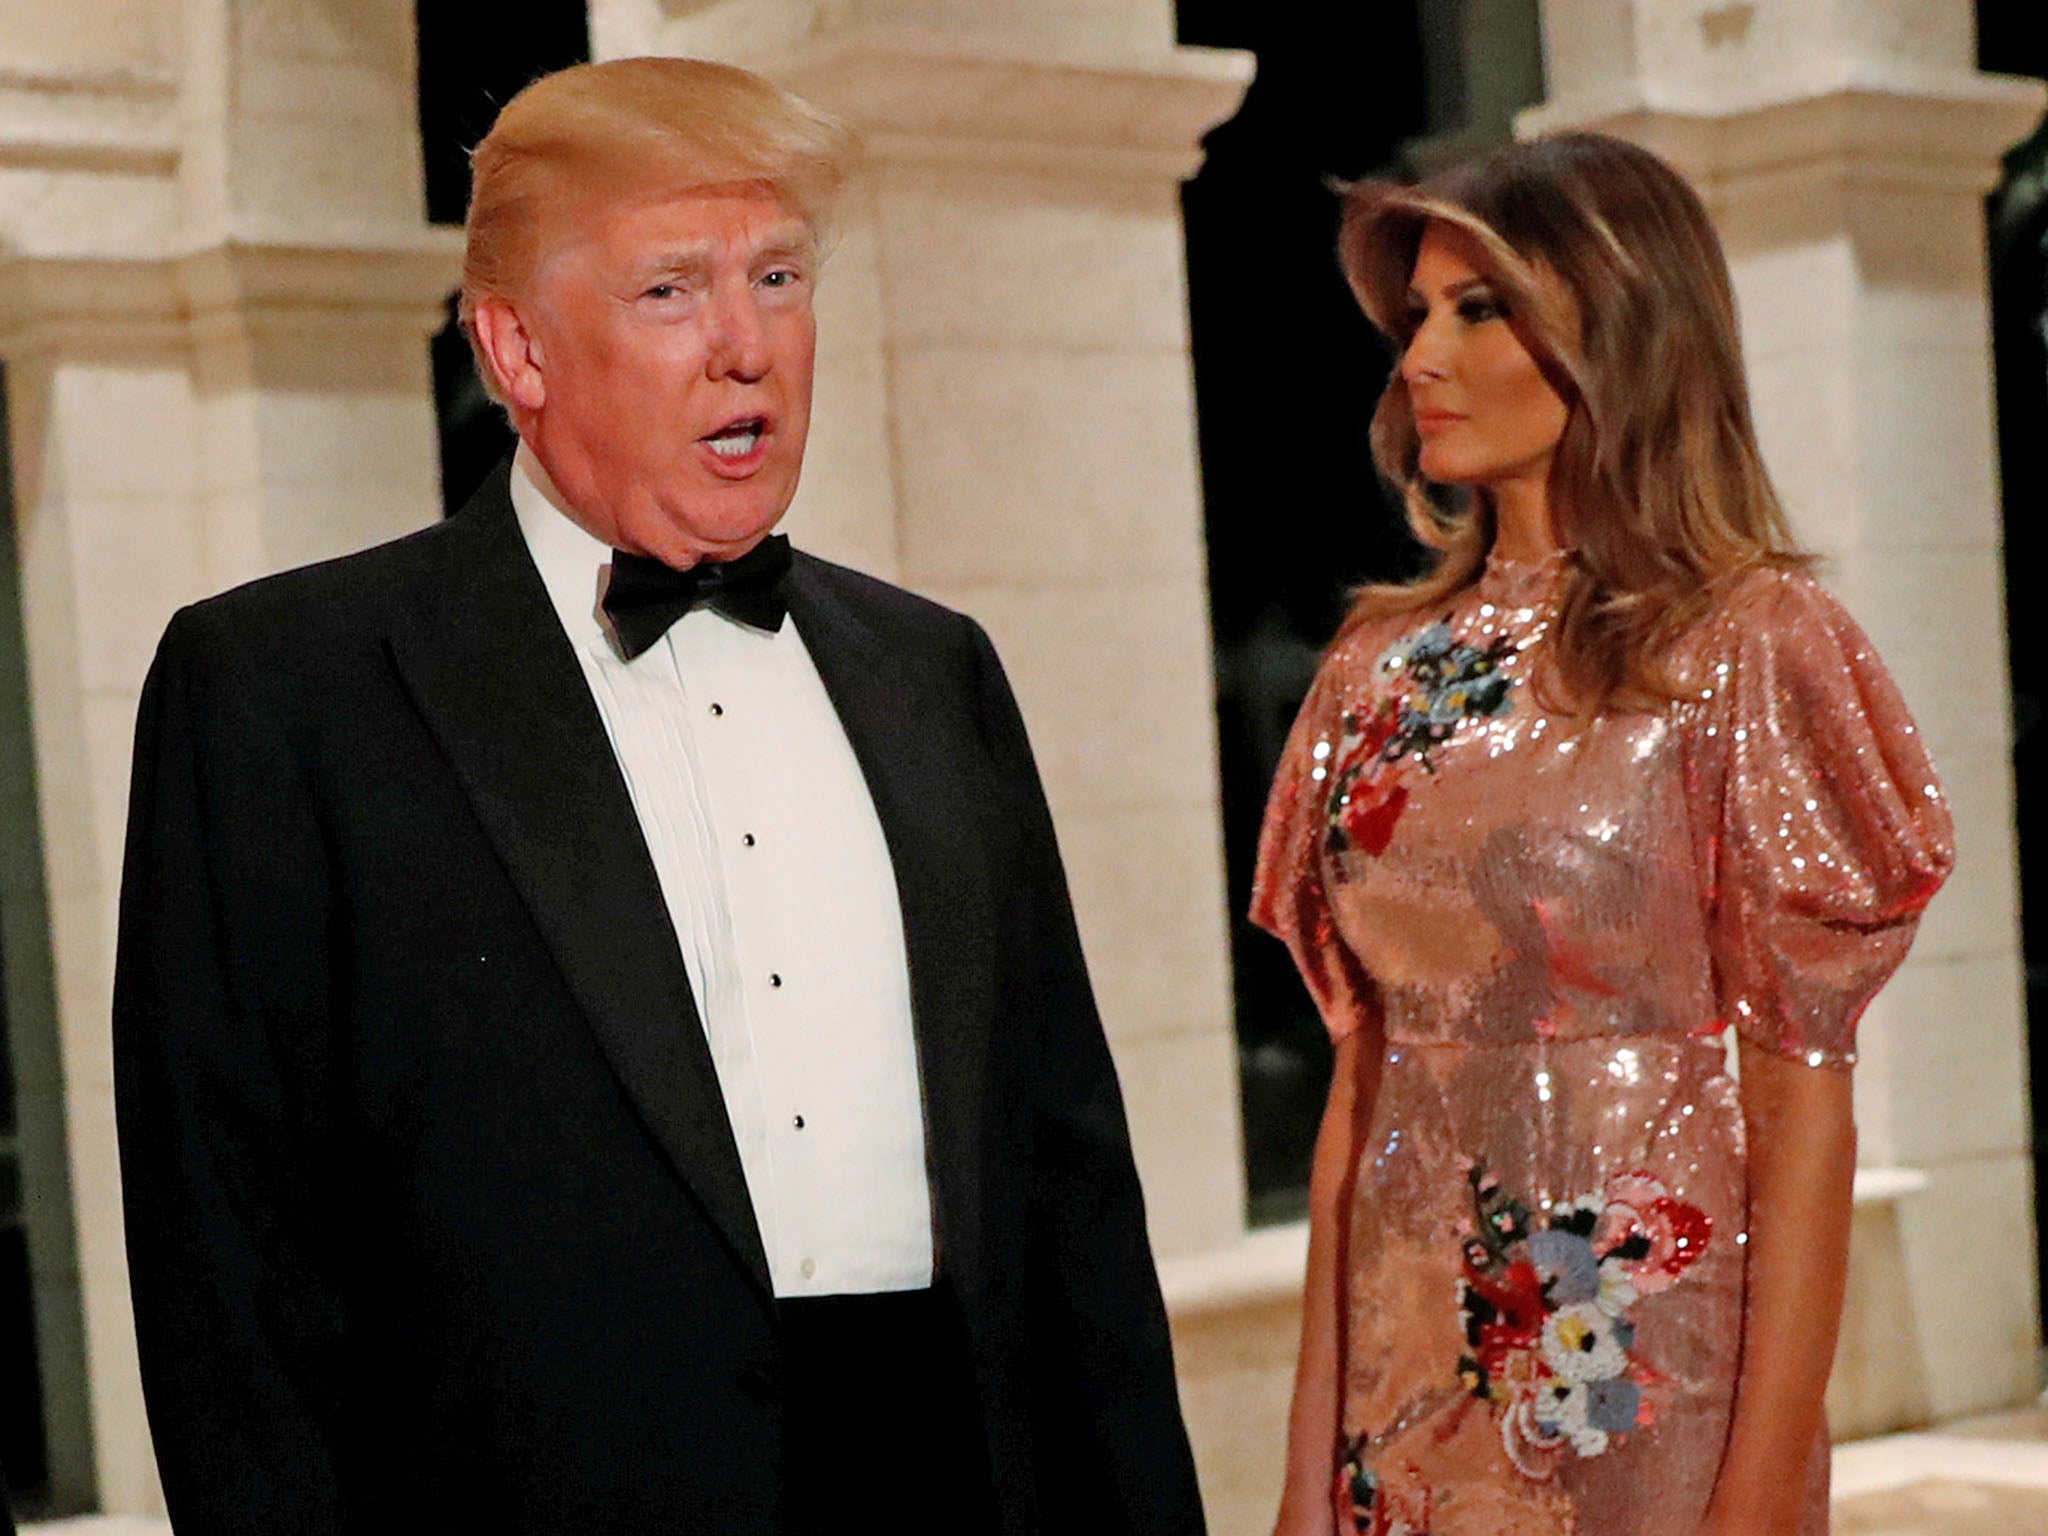 Melania Trump pulls out of attending Davos with Donald on their wedding anniversary The Independent The Independent